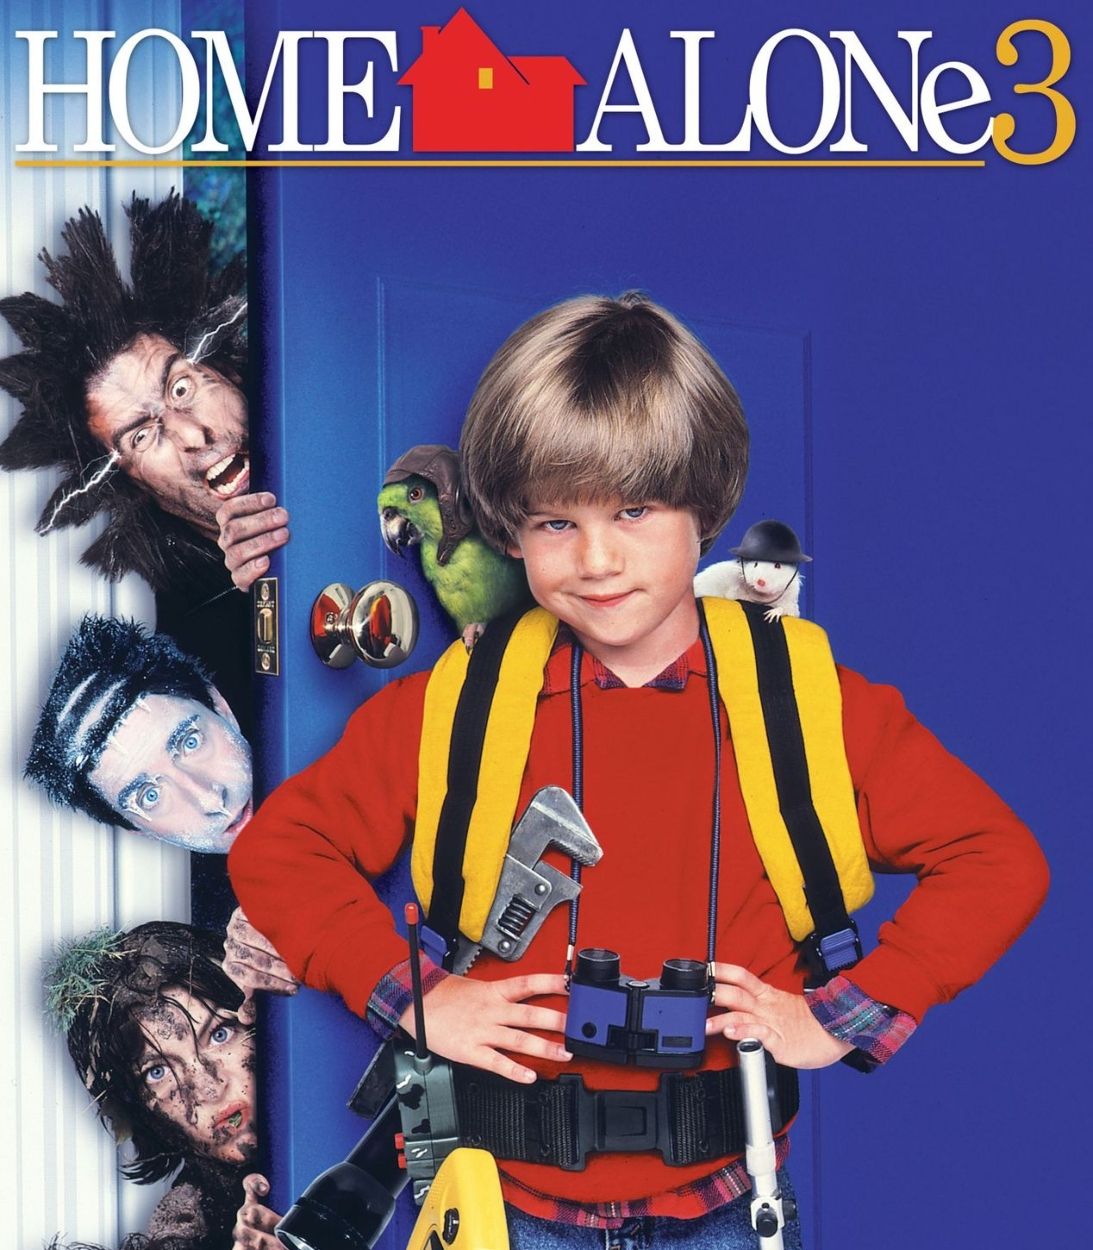 home alone 3 poster TLDR vertical